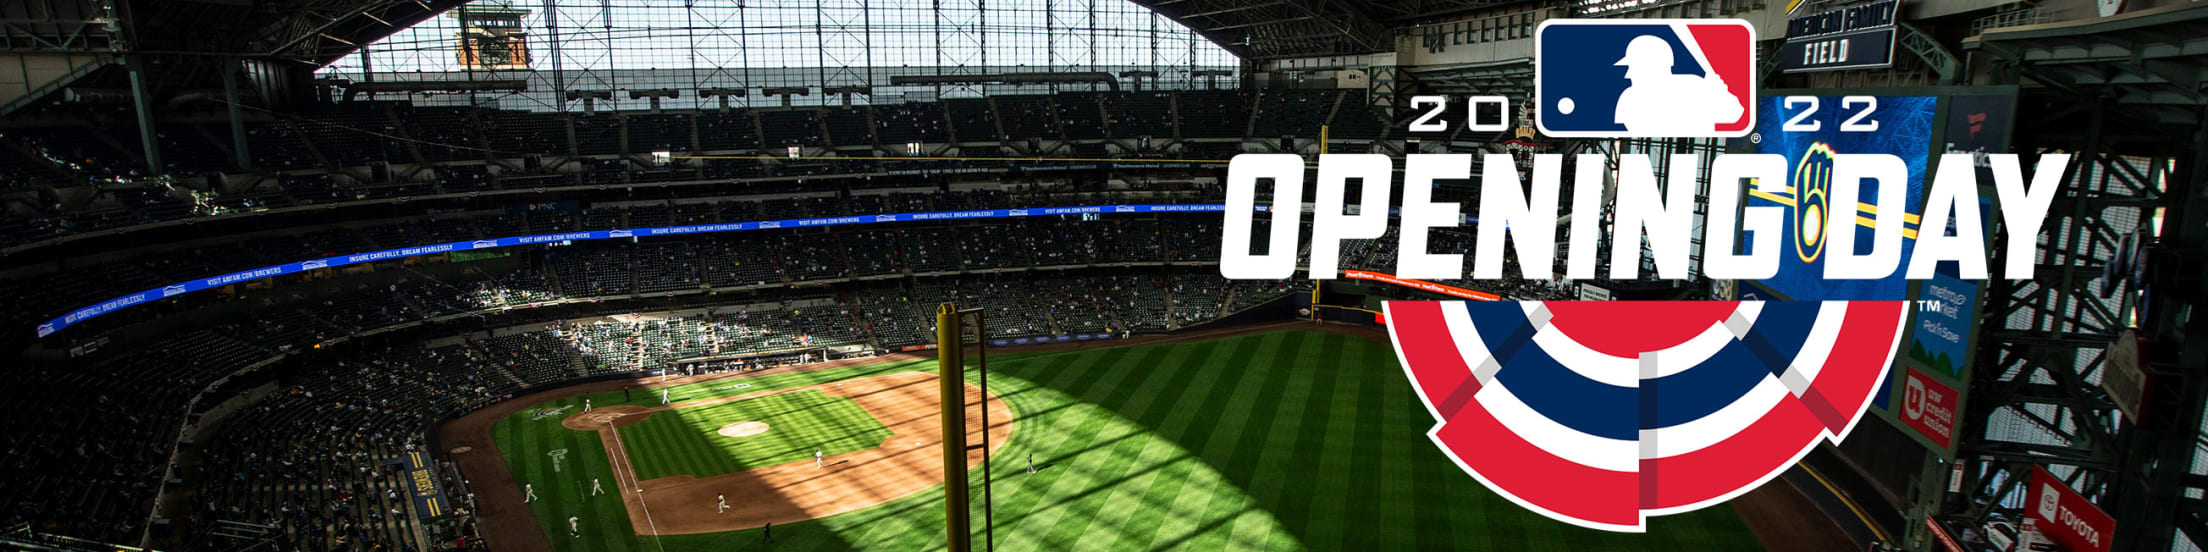 Brewers Opening Day Milwaukee Brewers